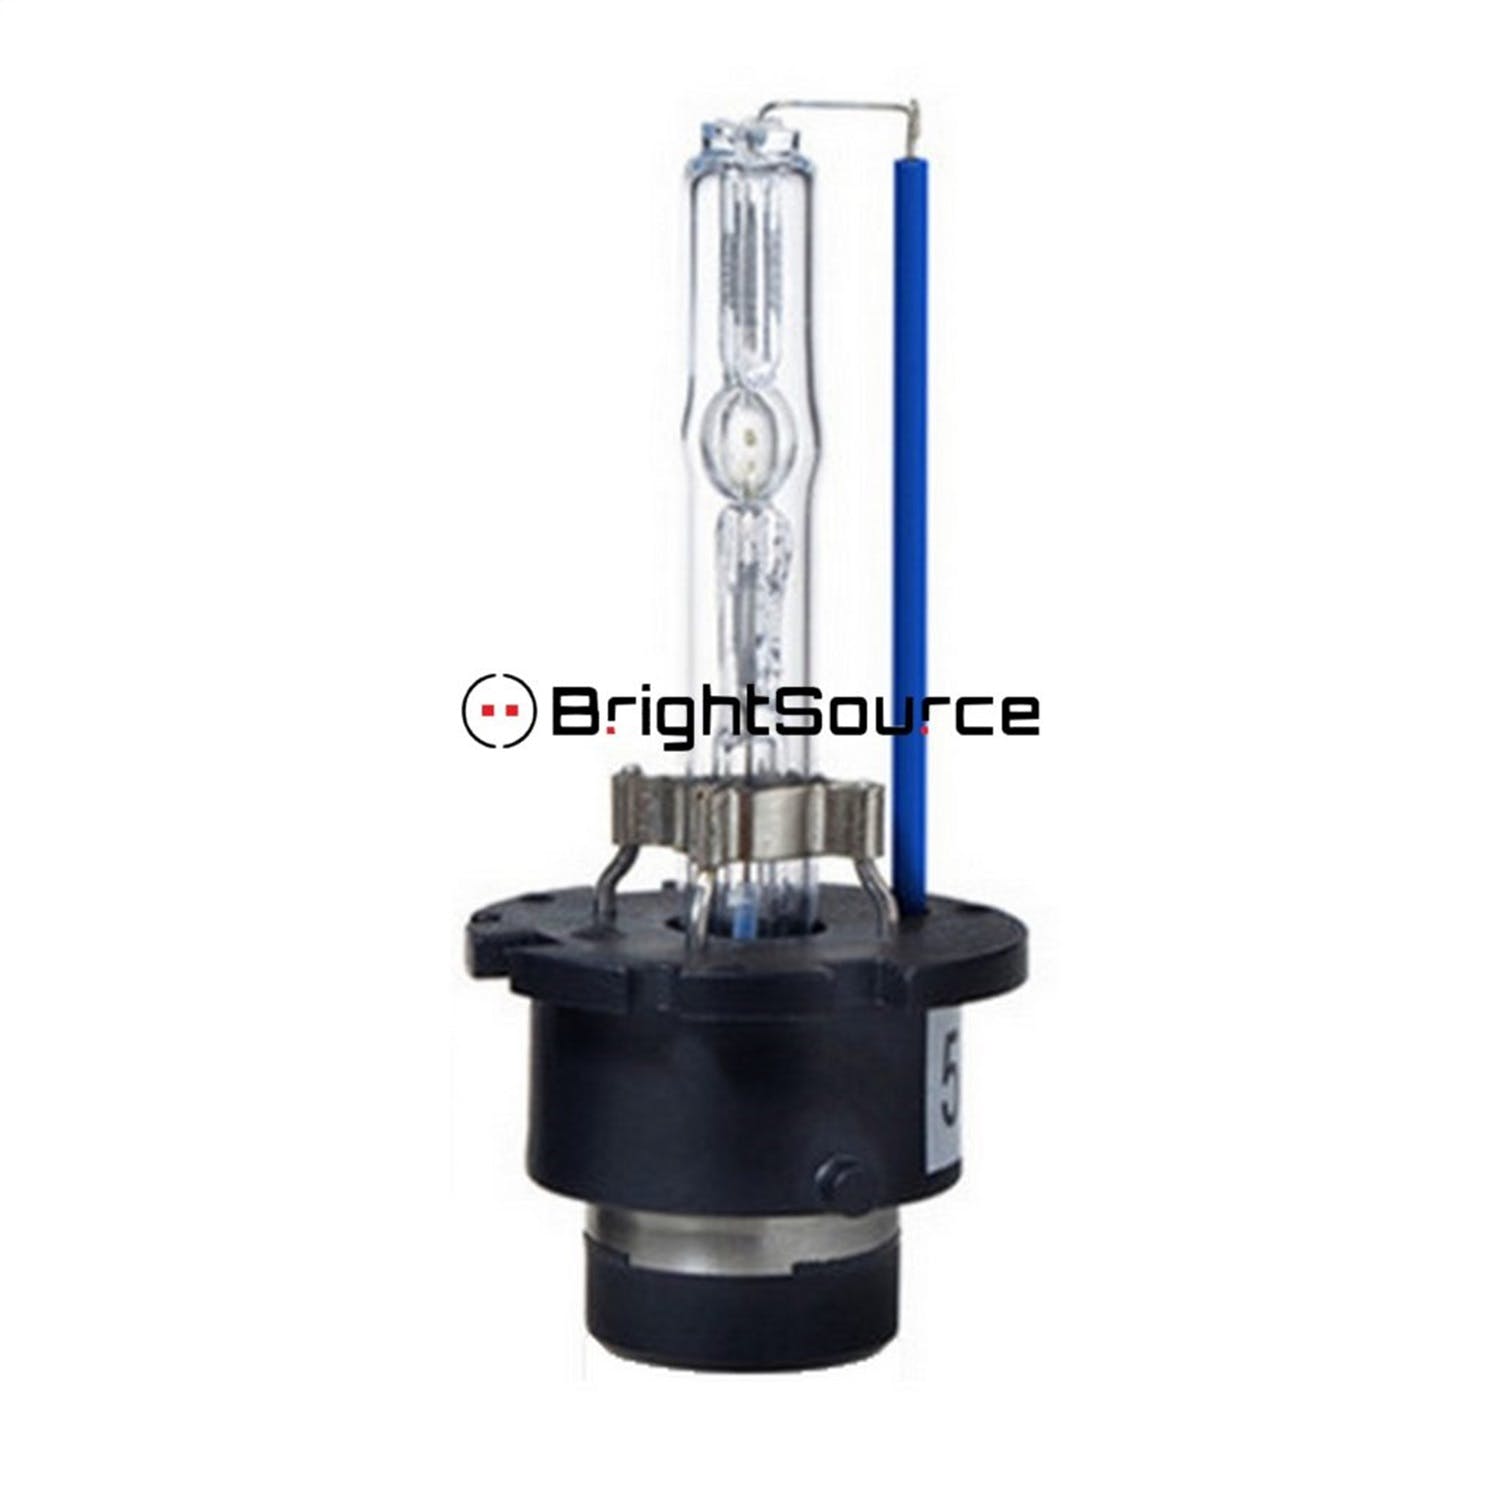 BrightSource D4S60 Single D4 OE Replacement/Upgrade Bulb 6000K